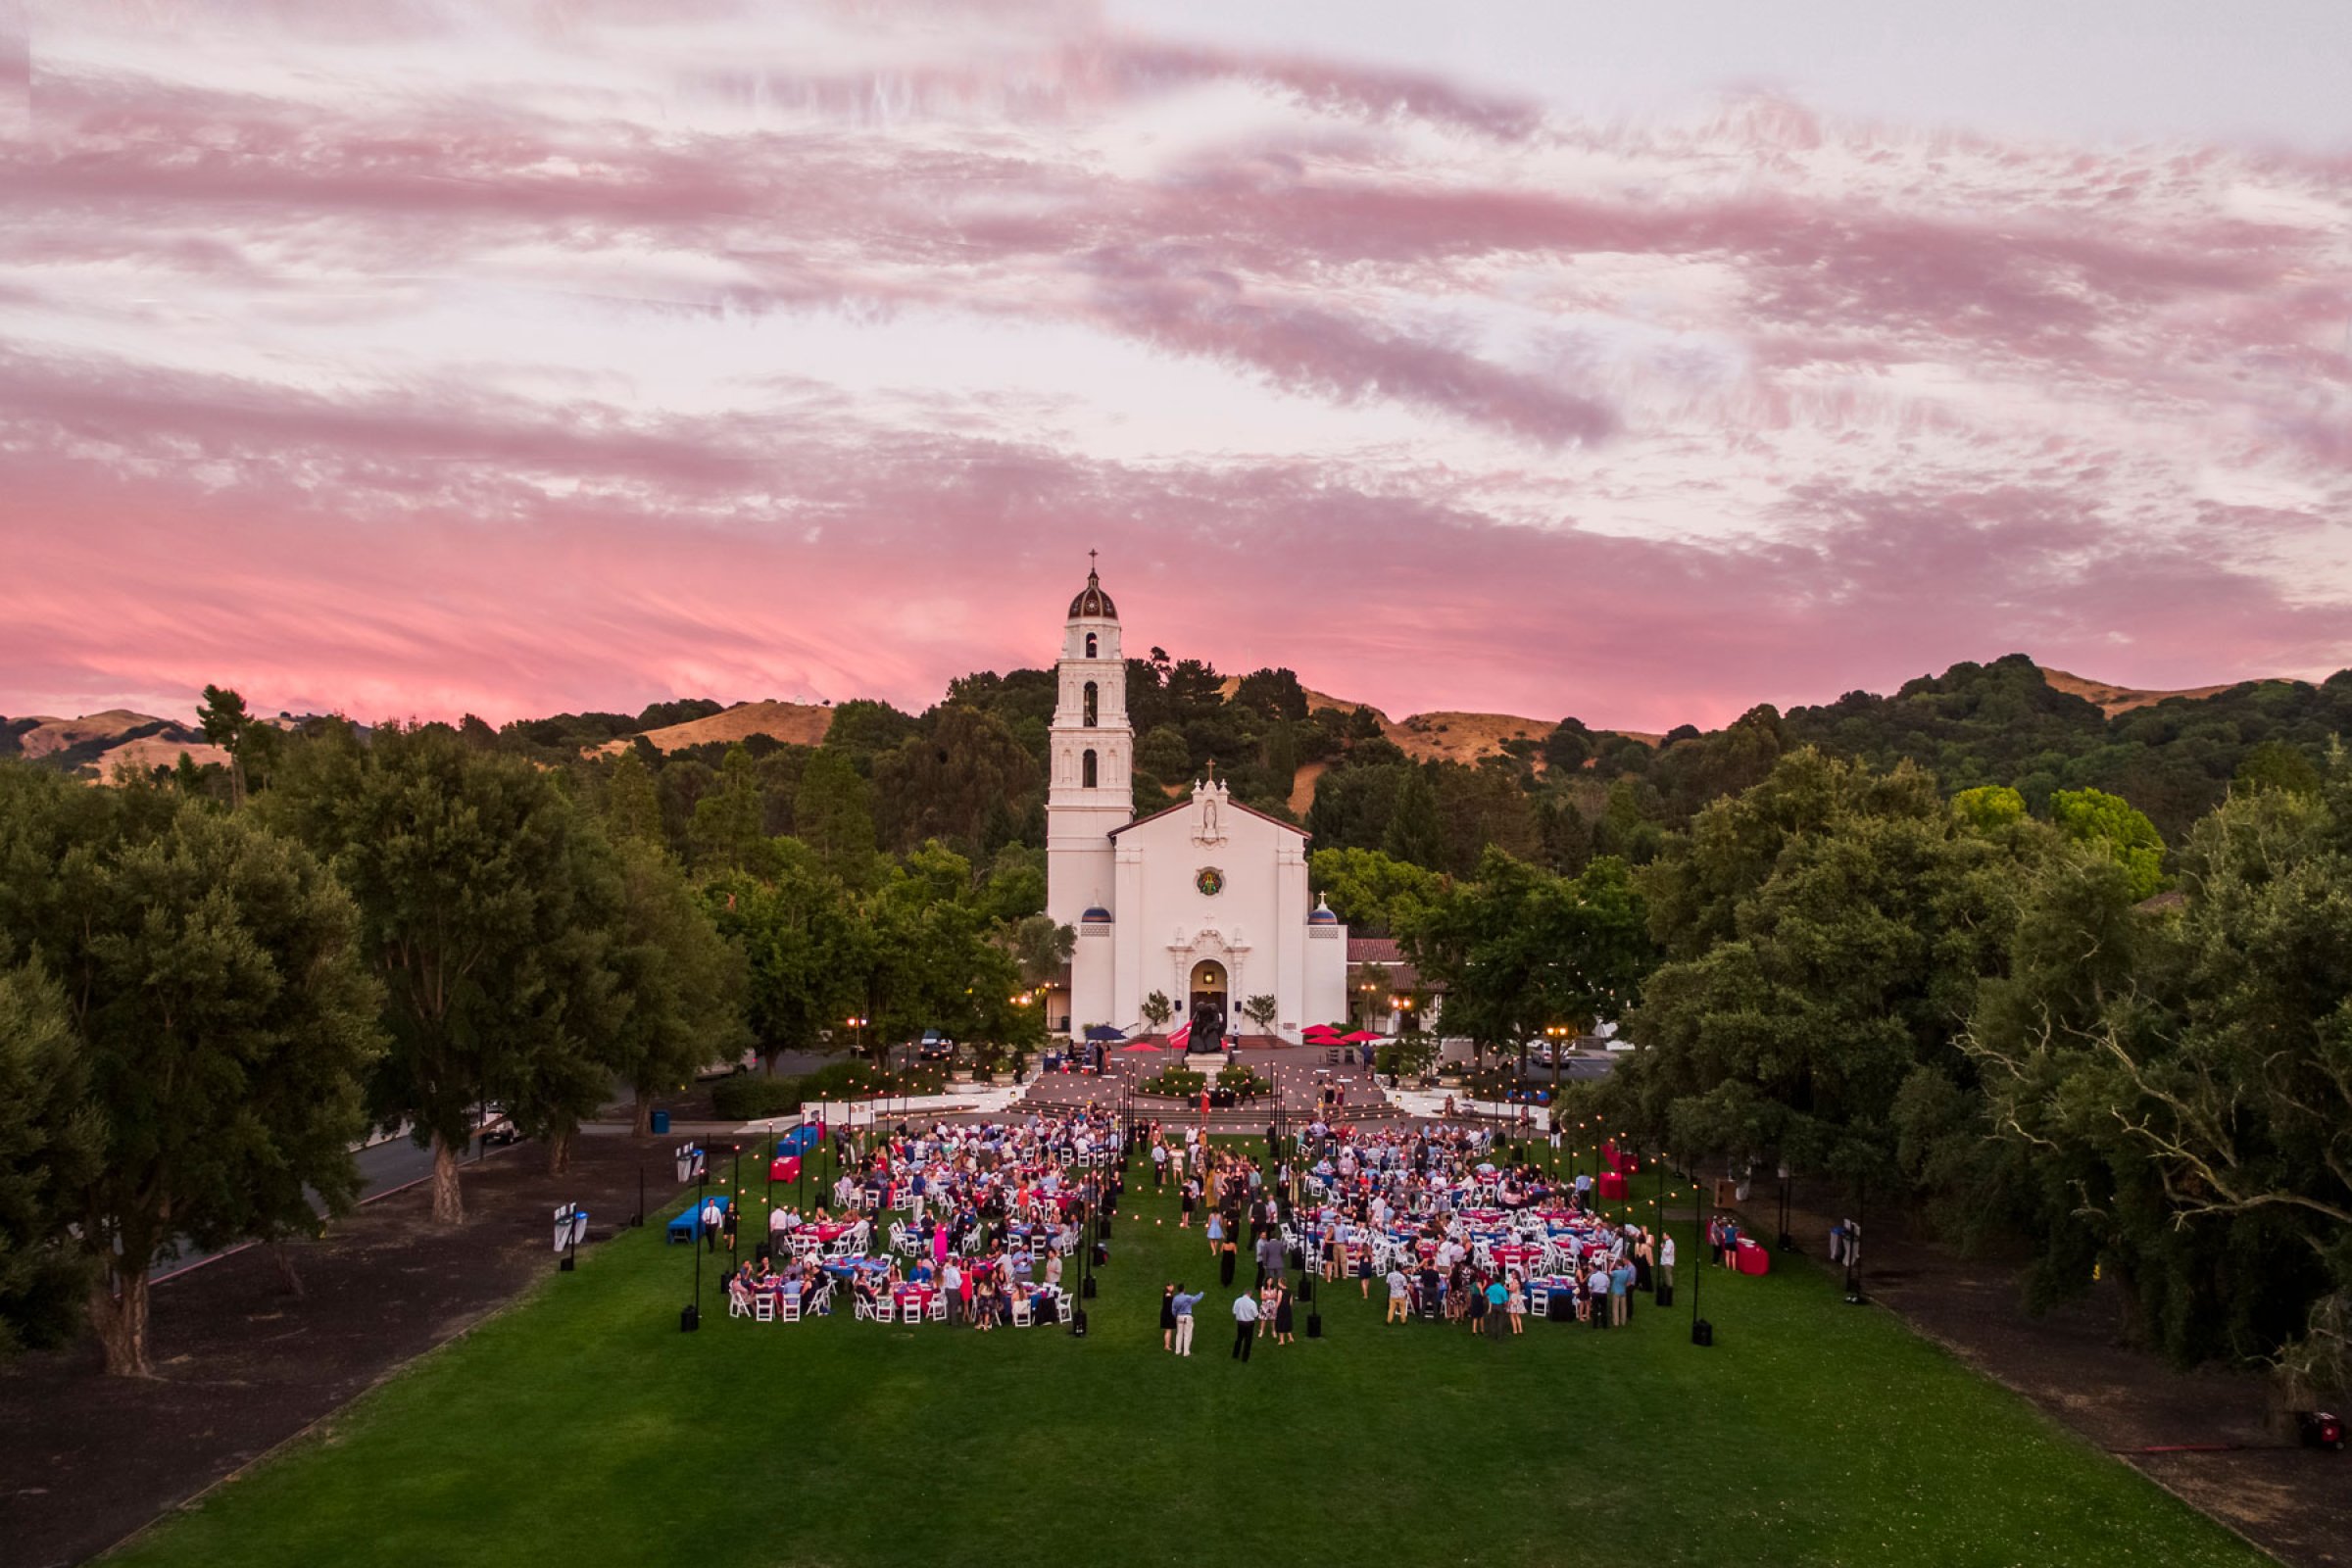 A Saint Mary's College campus event with tables and lights on the chapel lawn